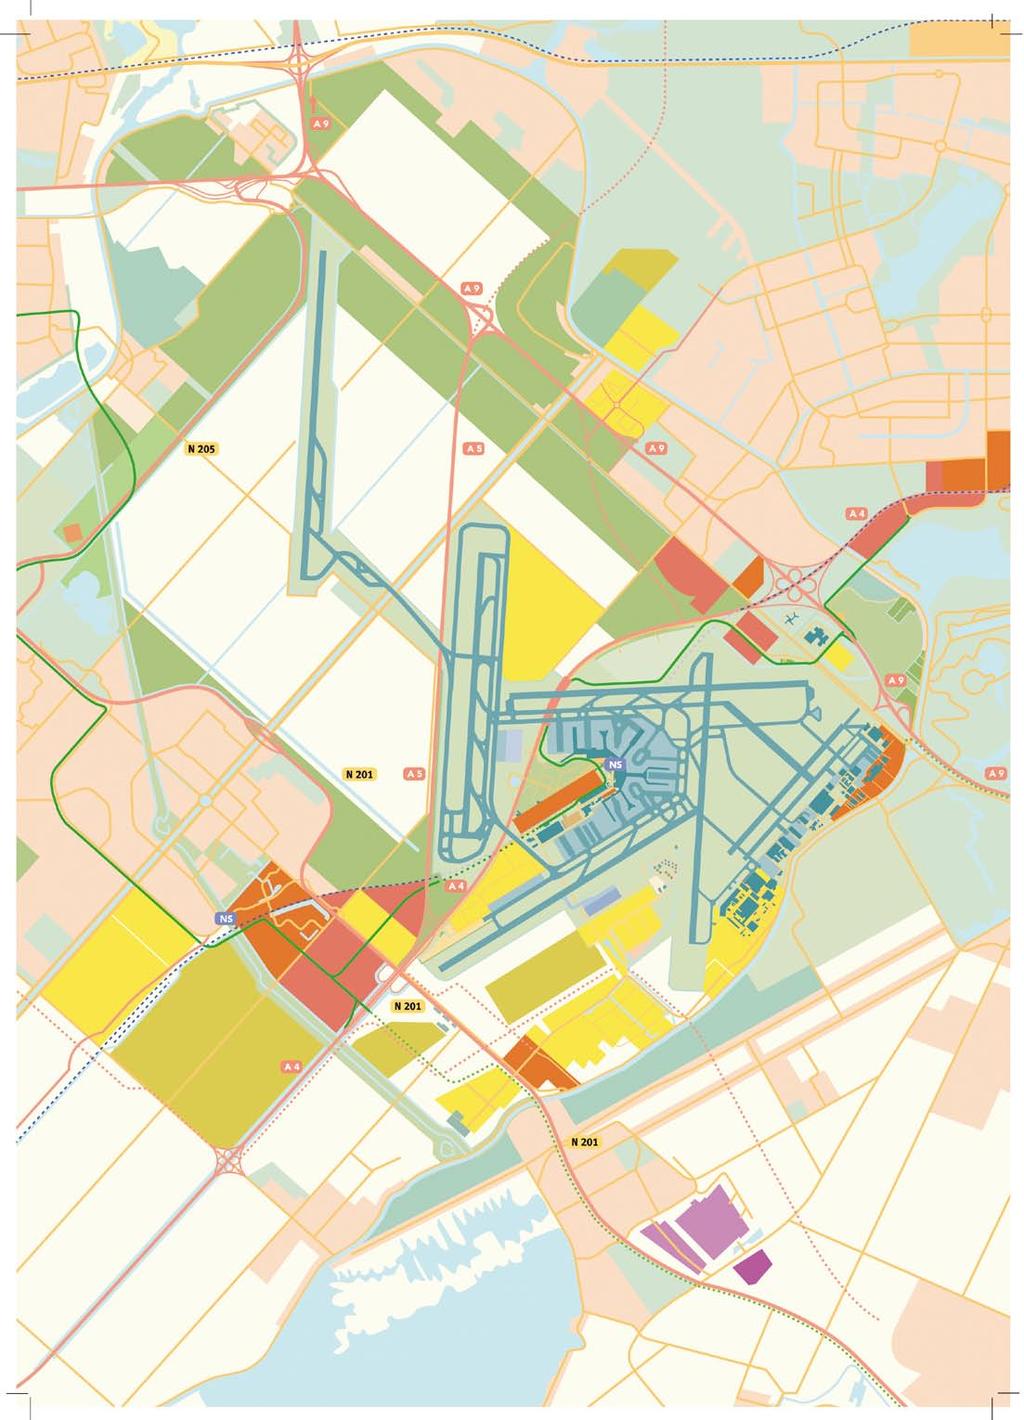 Infrastructure Amsterdam Airport Schiphol area Capacity Terminal passengers 60-65 mln per year 1 Aircraft stands Connected 93 Disconnected 103 Total 196 Car parking spaces Passengers / visitors